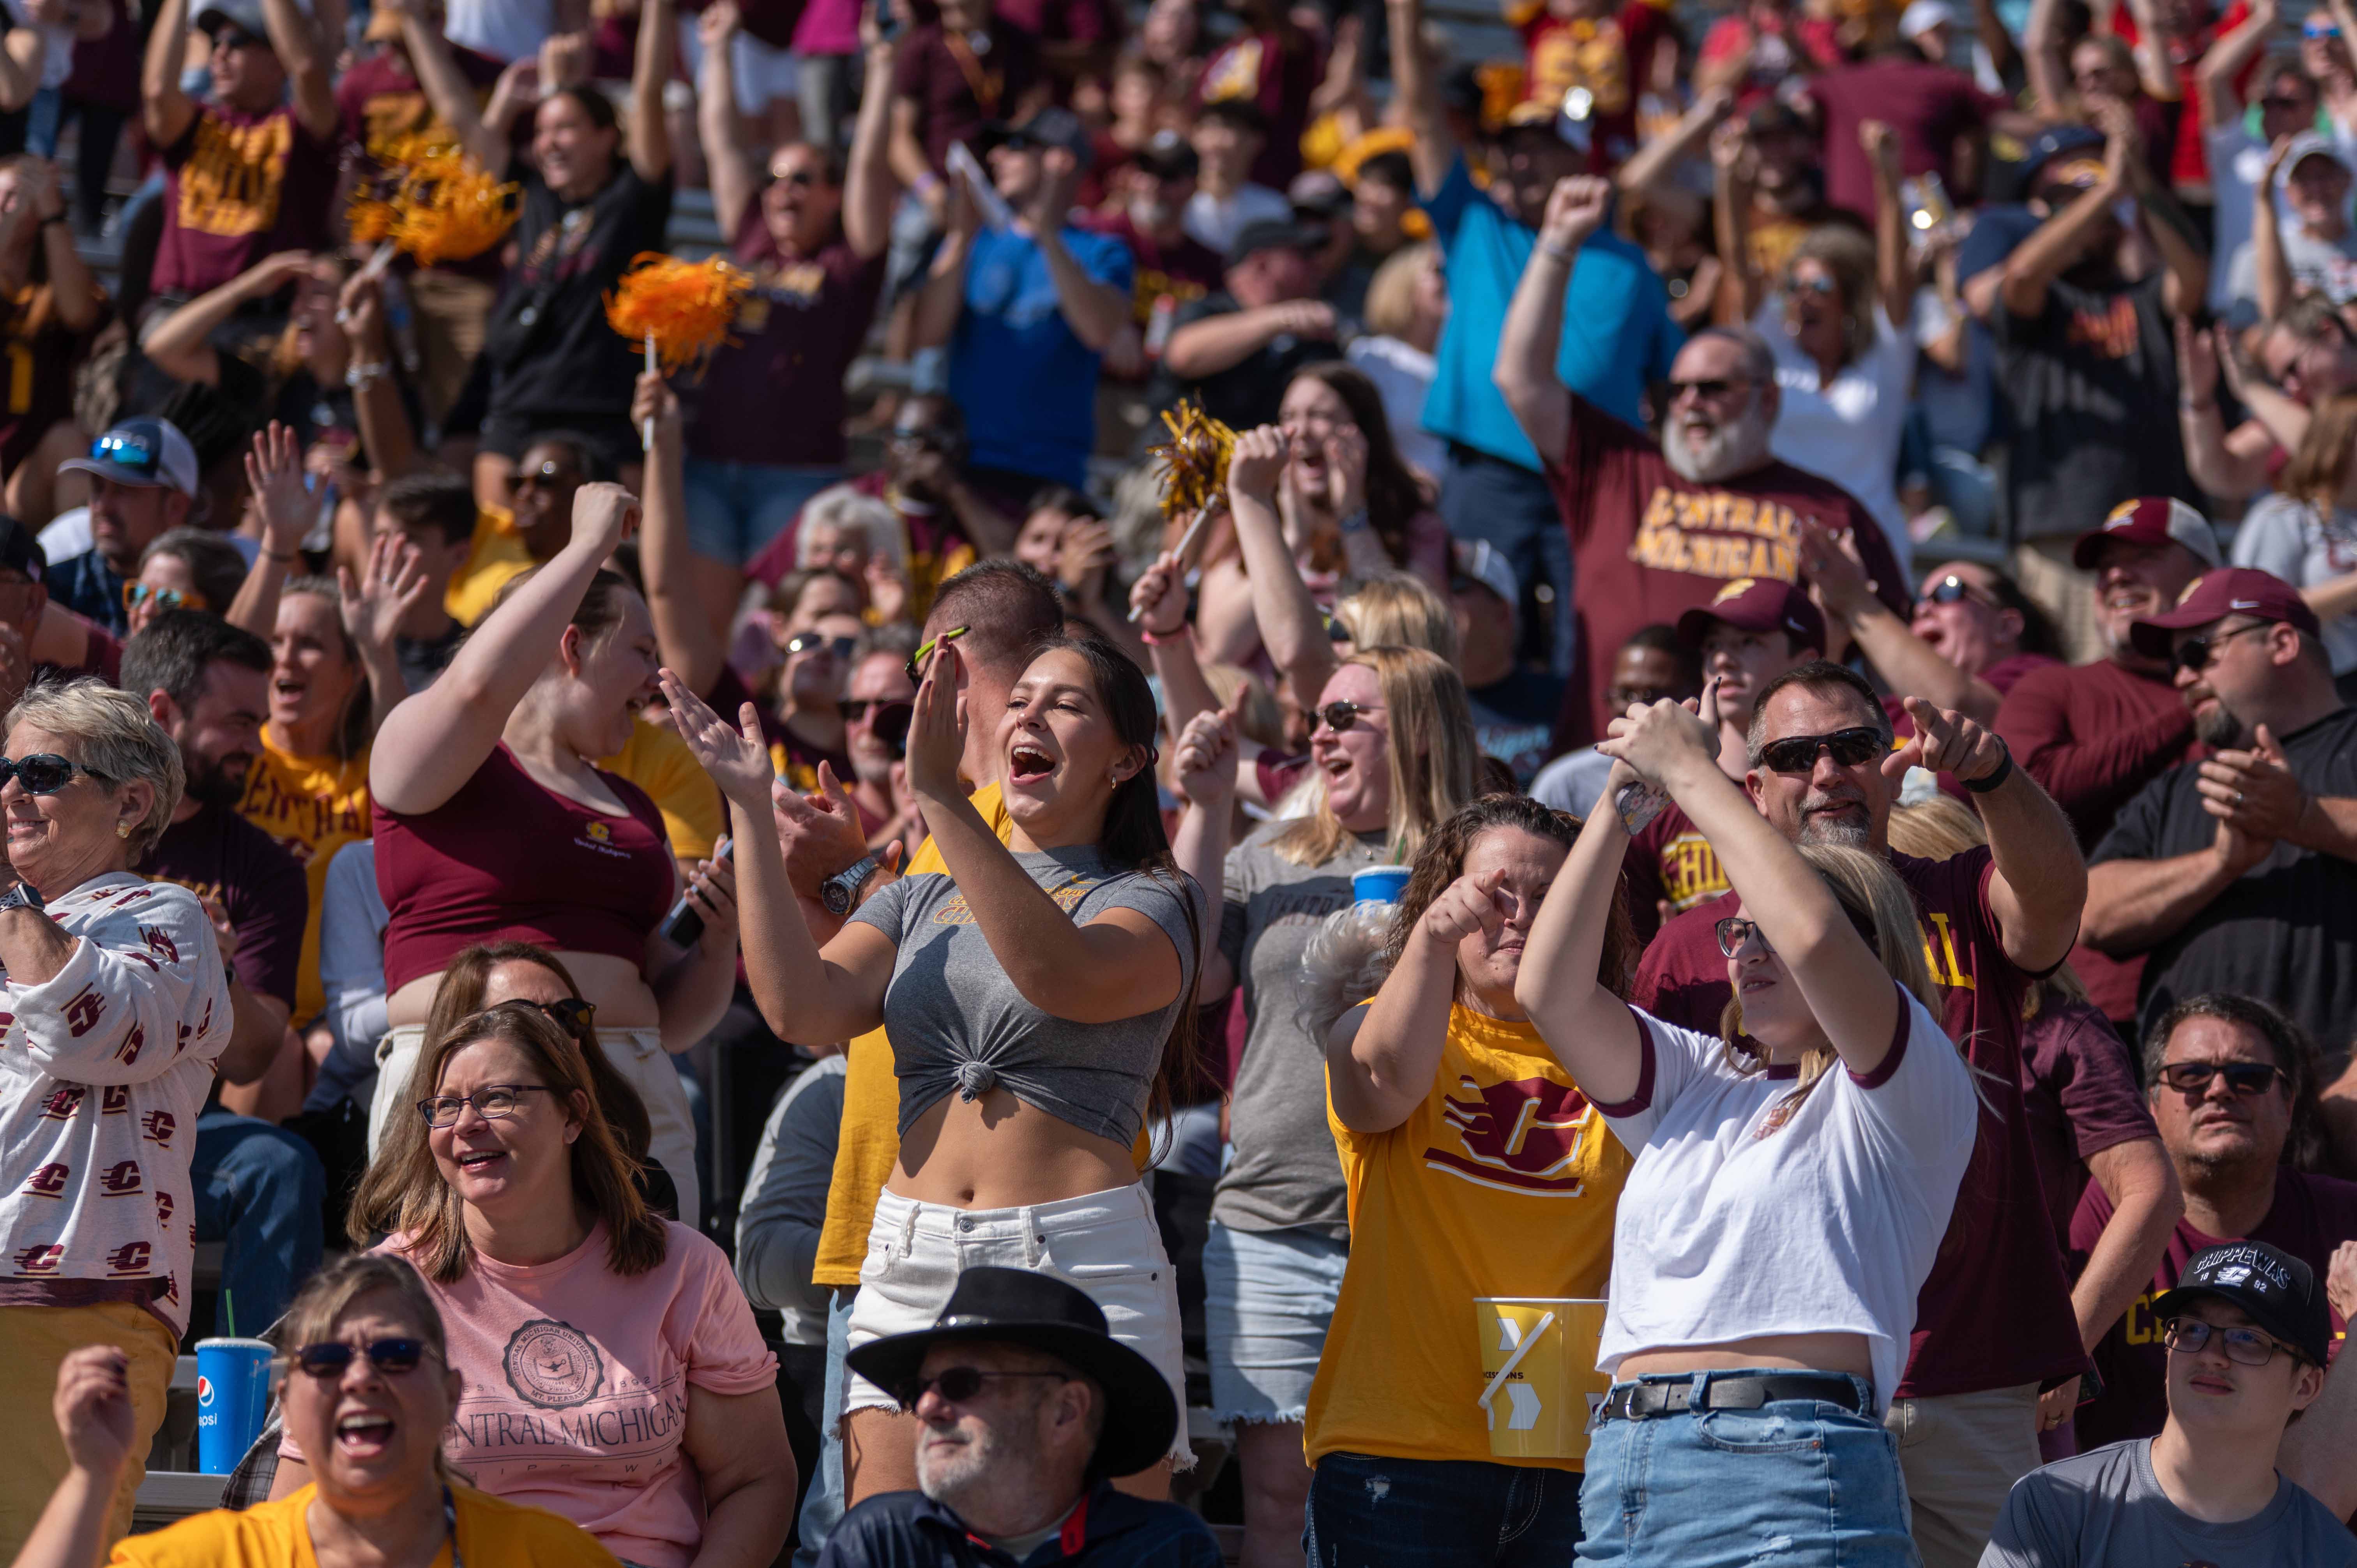 CMU fans wearing maroon and gold cheering on the football team